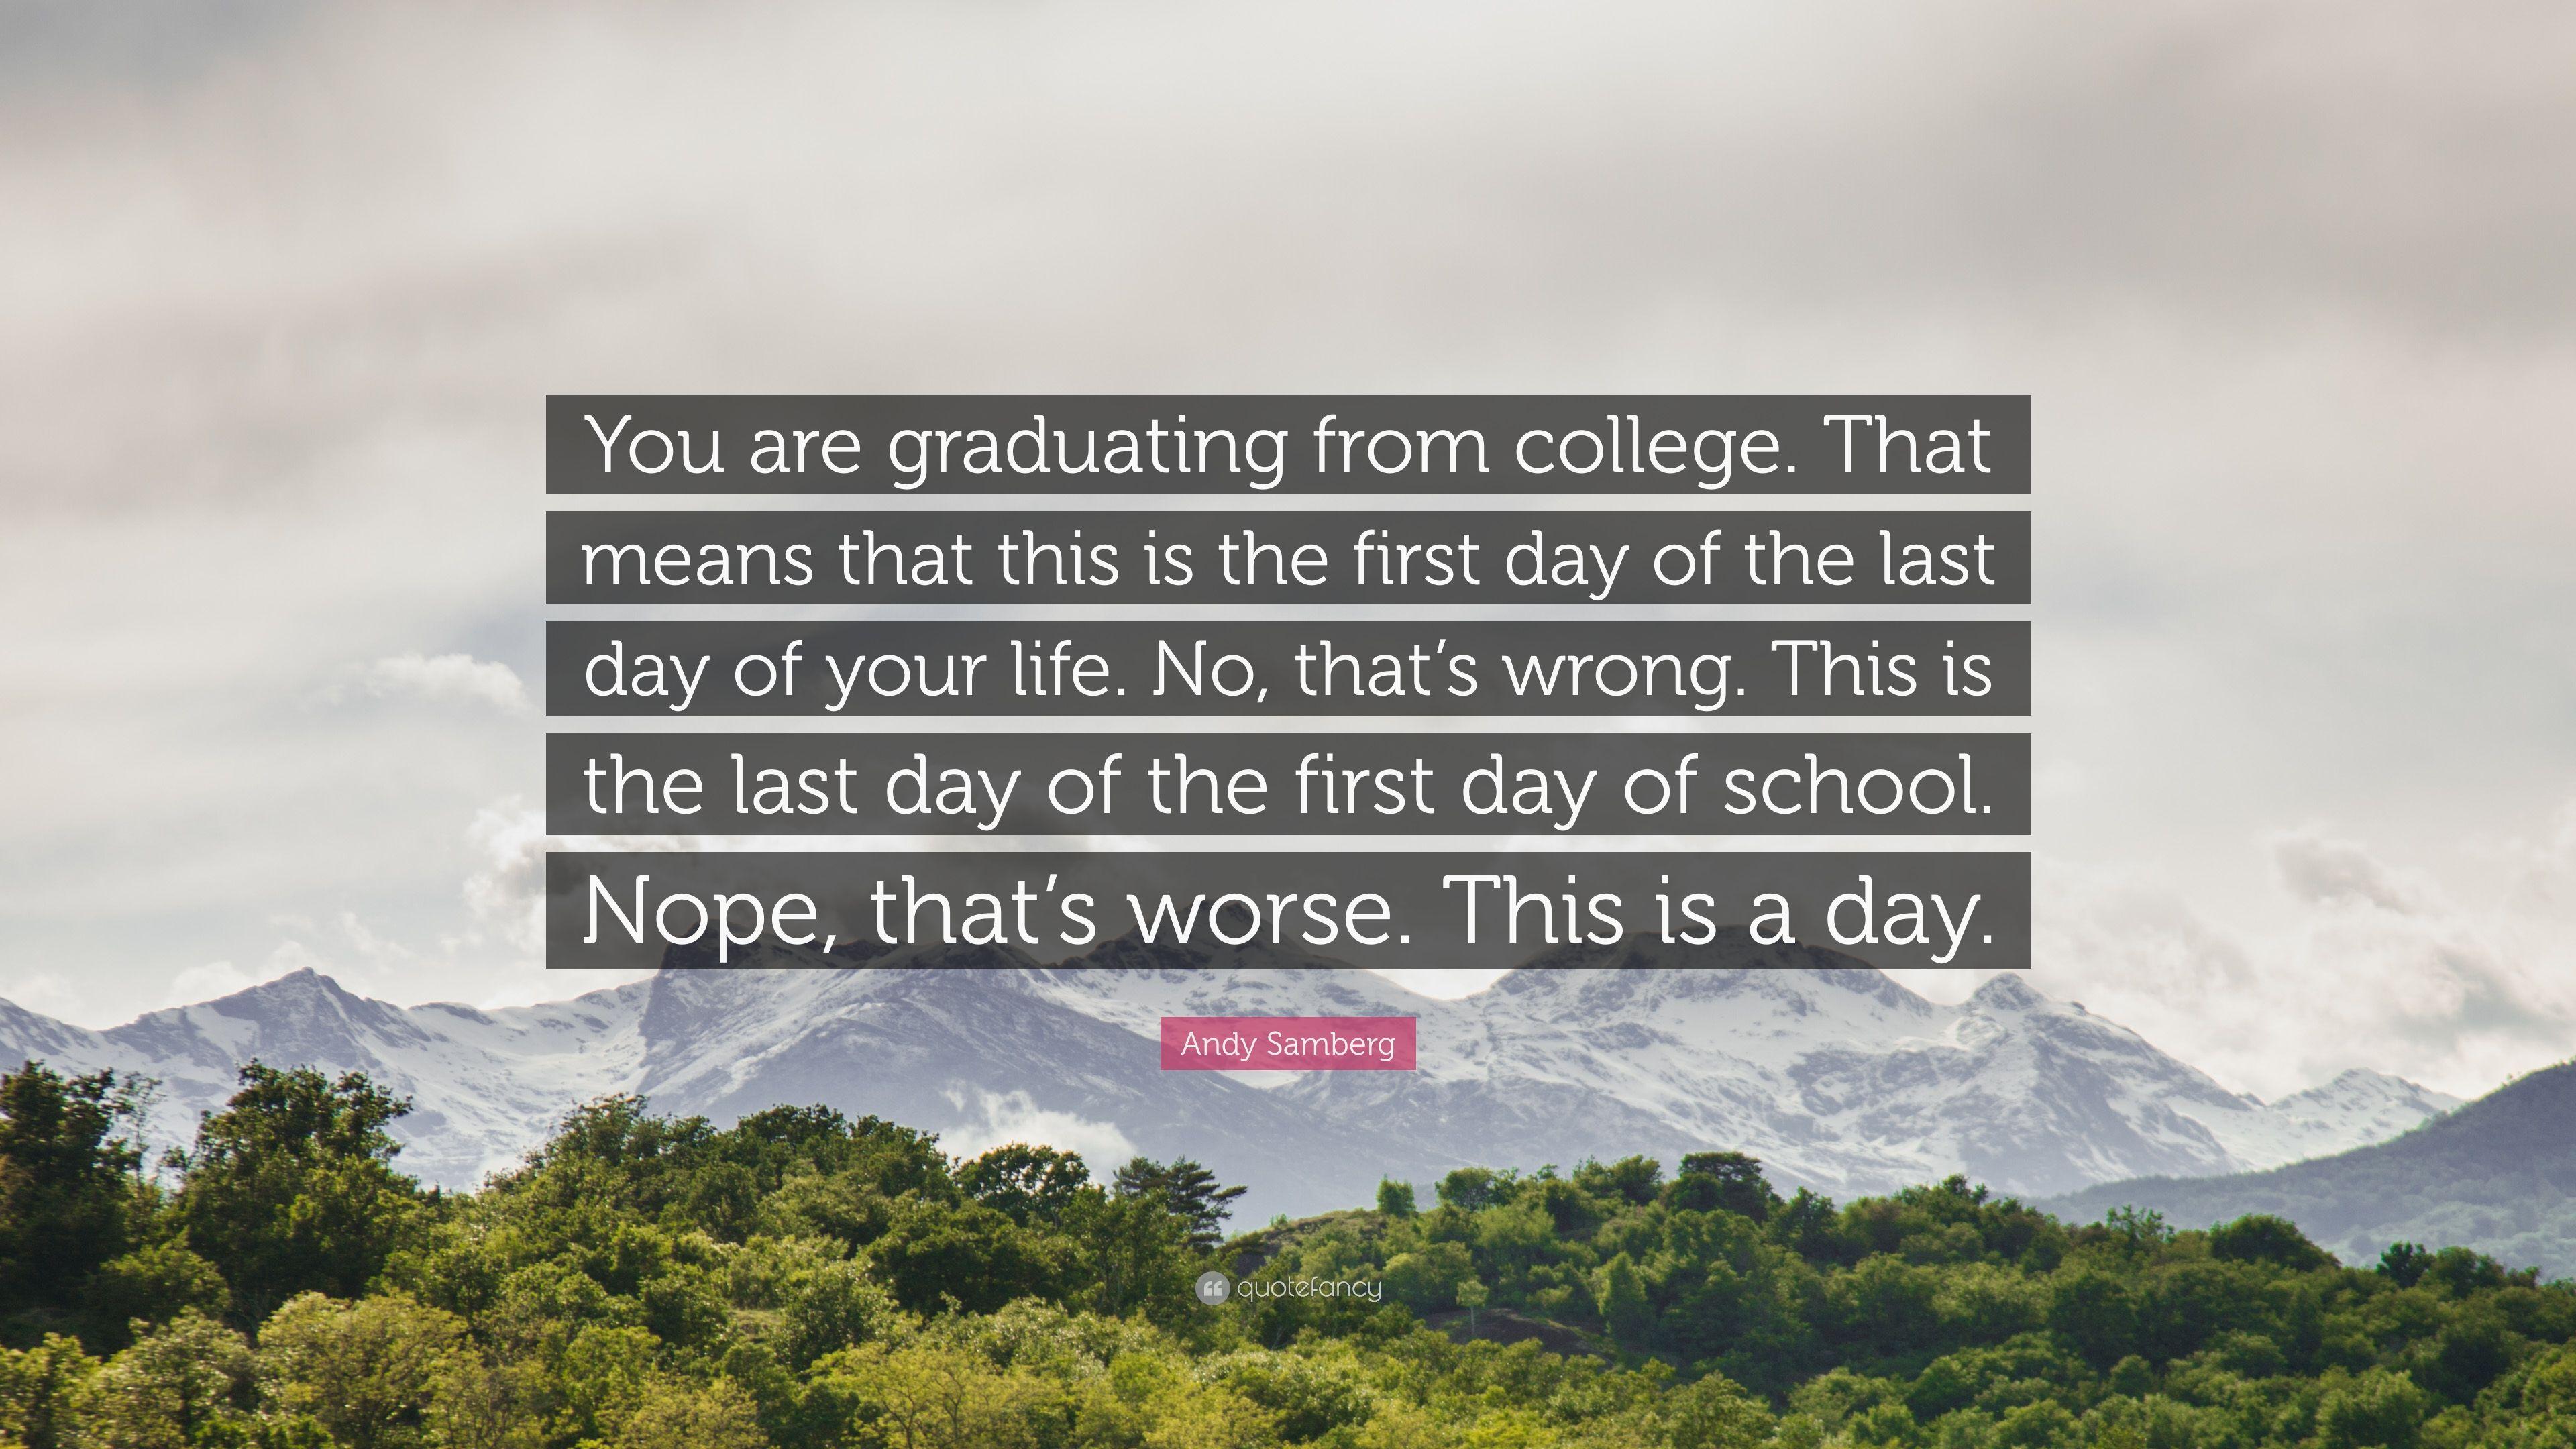 Andy Samberg Quote: “You are graduating from college. That means